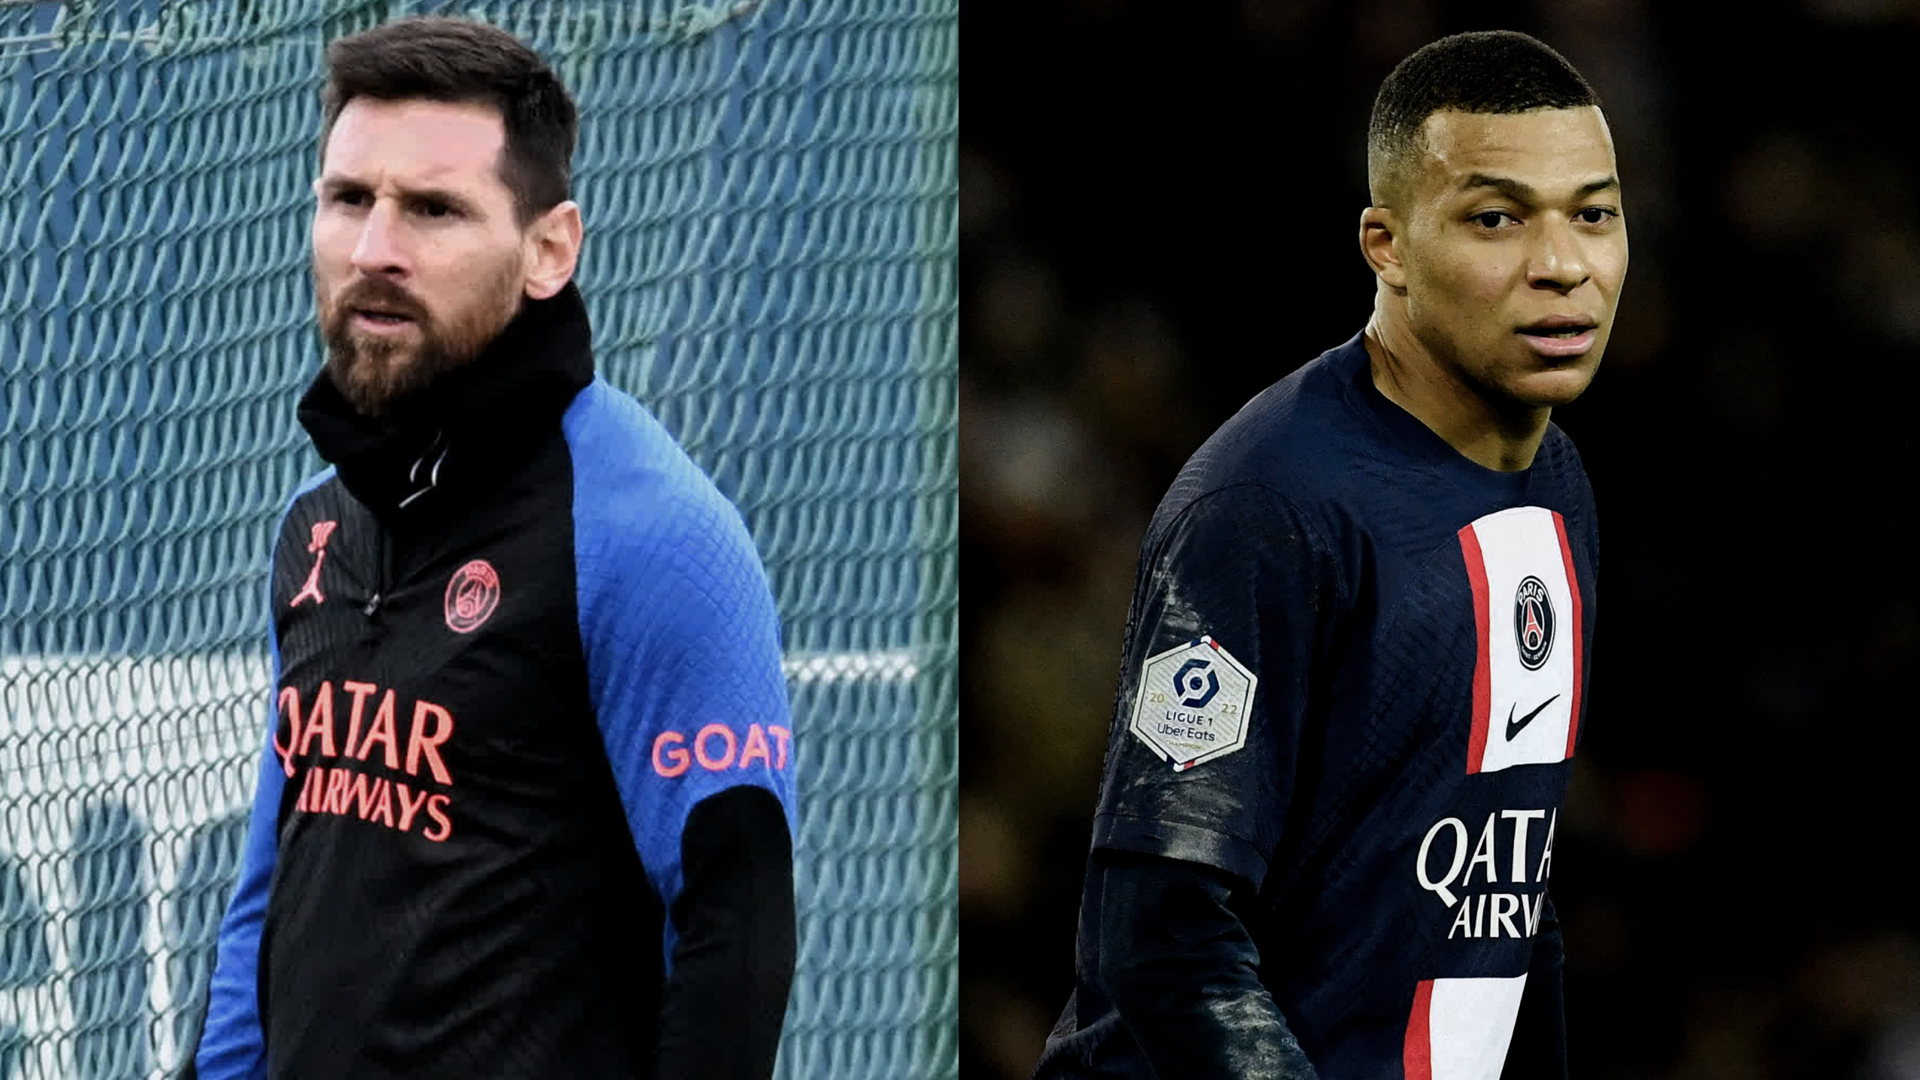 World Cup 2022: Mbappe angers Messi again: Cristiano Ronaldo is untouchable